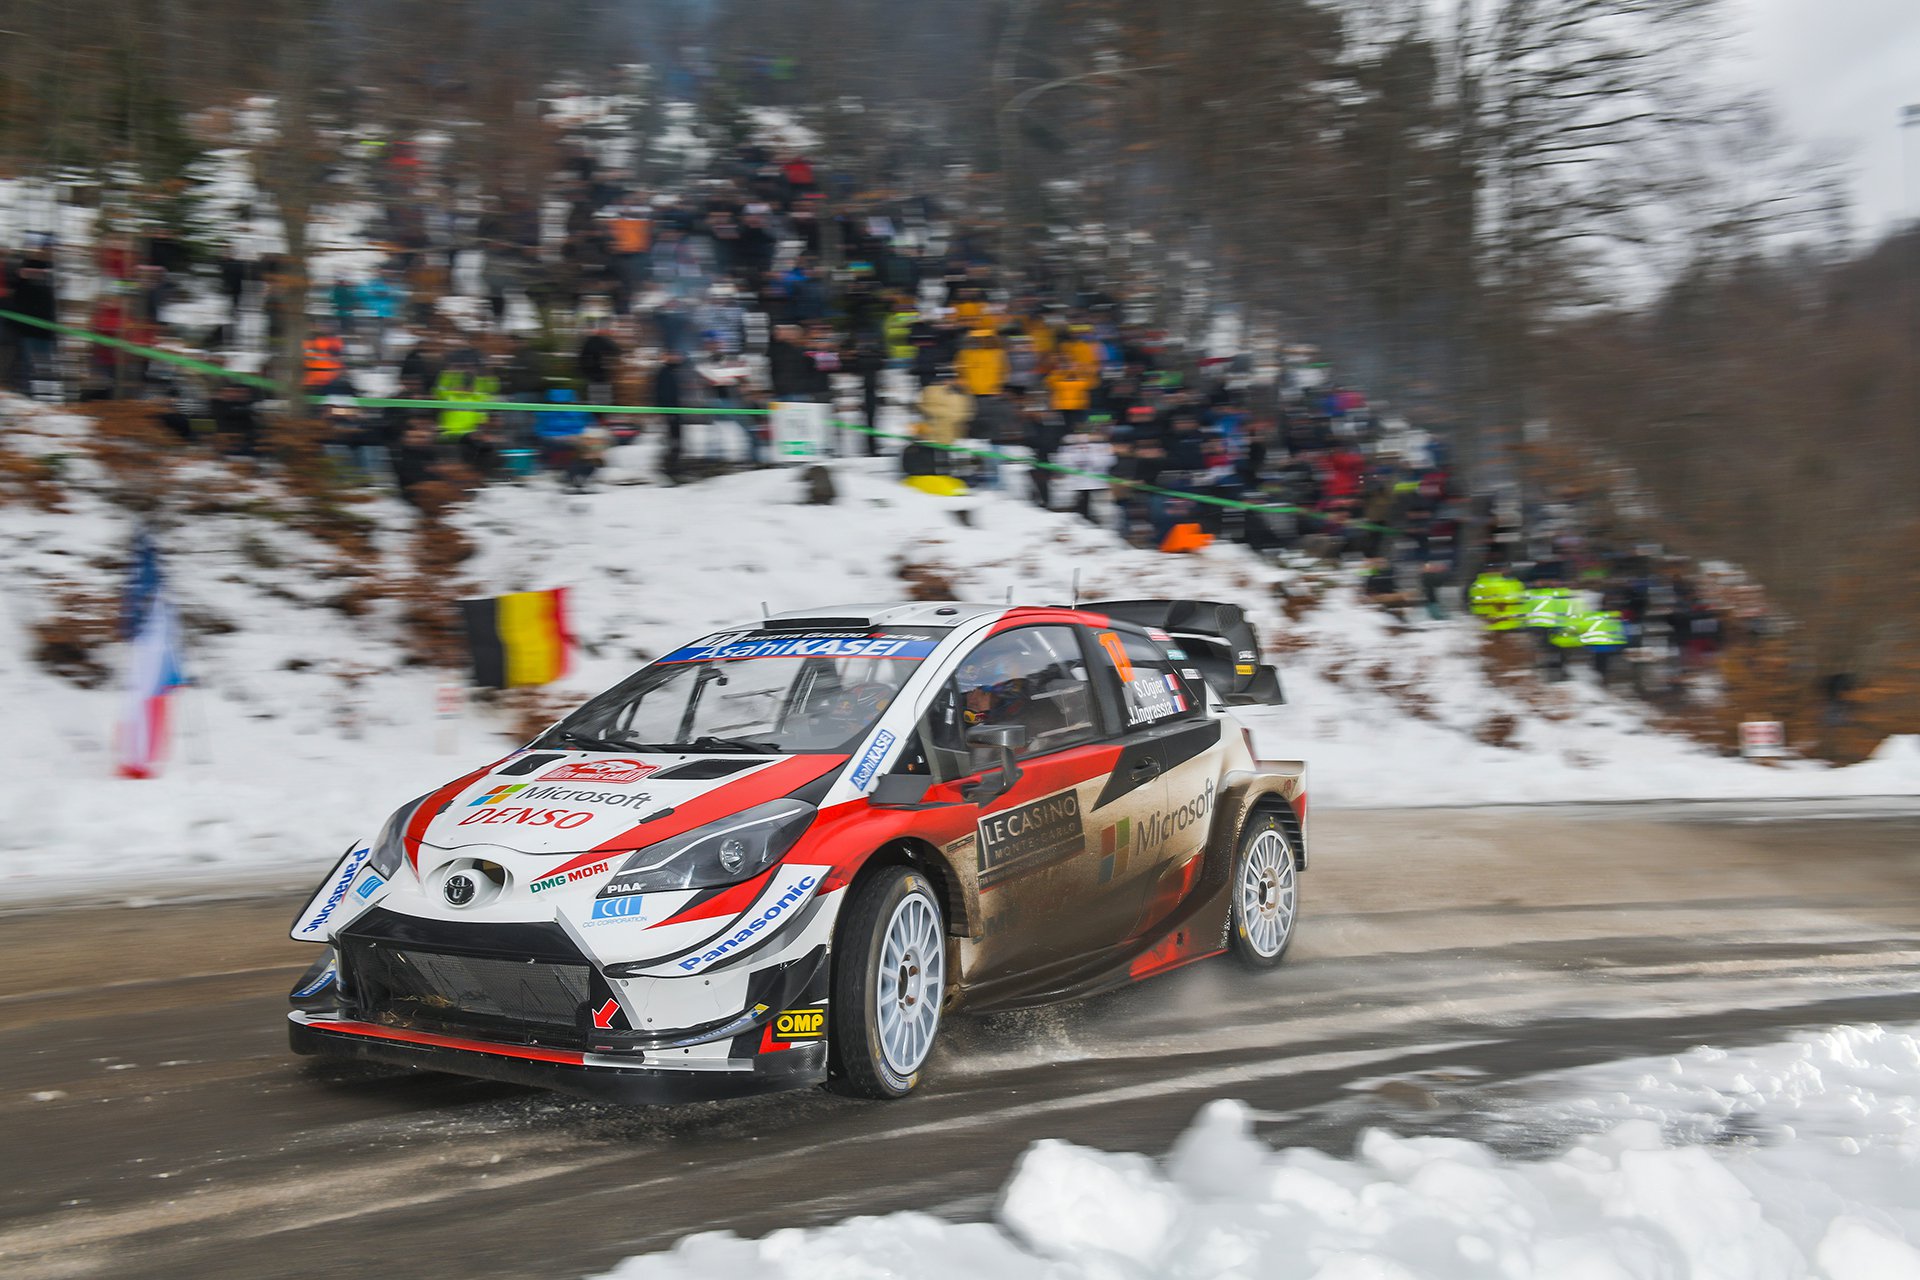 Rally Sweden: PreviewTOYOTA GAZOO Racing targets a third Sweden triumph - Image 1